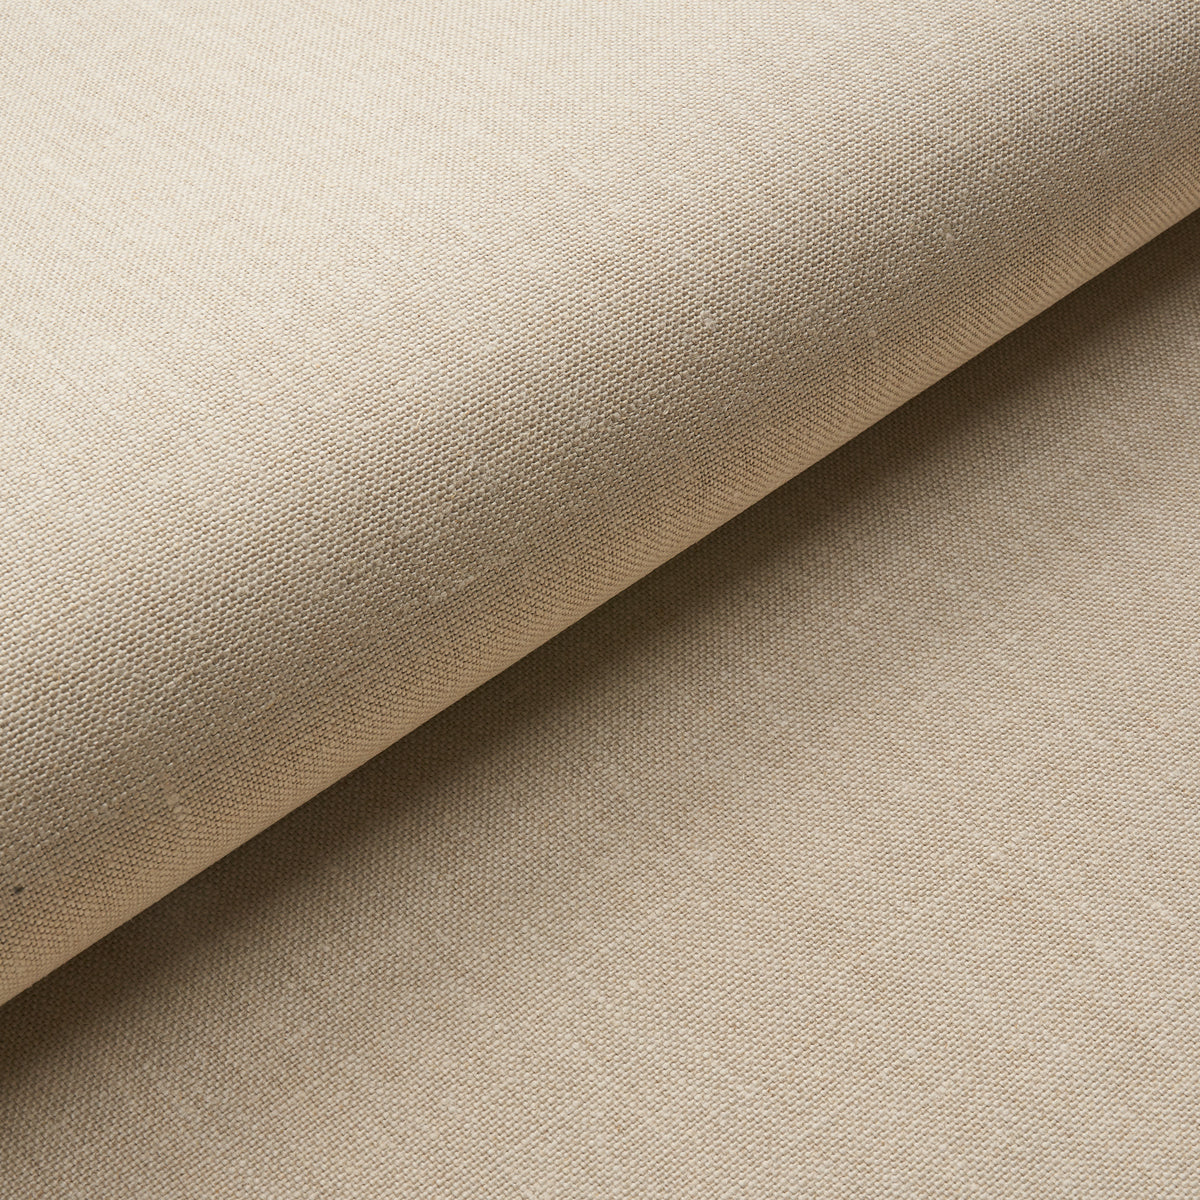 PERFORMANCE LINEN WALLCOVERING | PARCHMENT